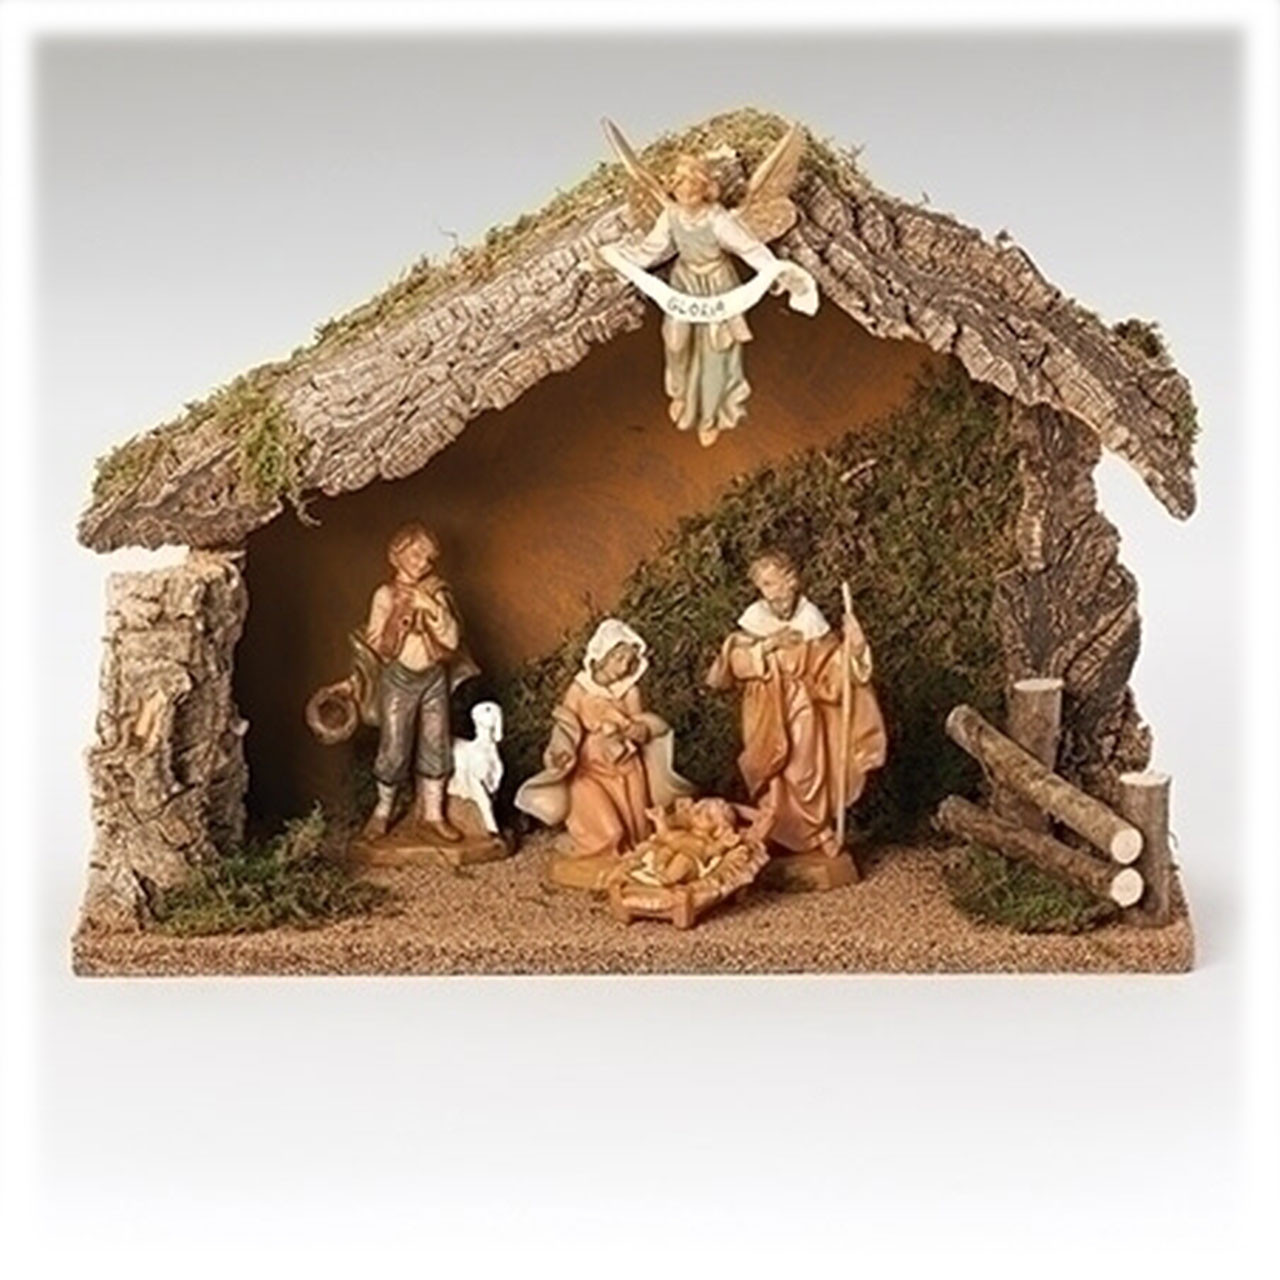 5pc Fontanini Nativity Set with Stable & Figures